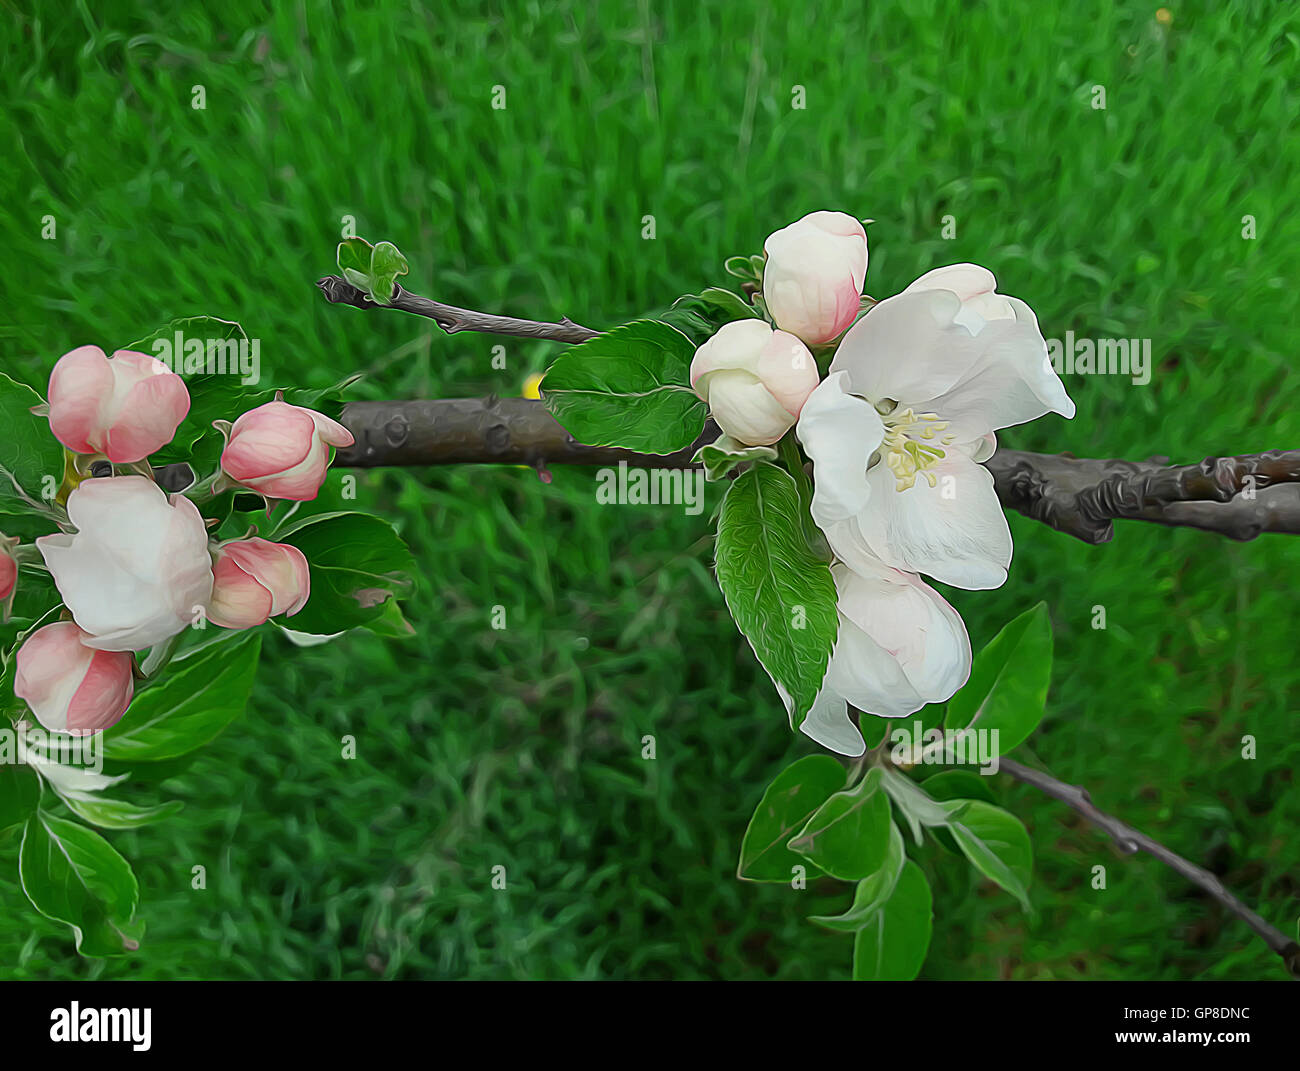 Branch of apple flowers blooming on green grass background Stock Photo